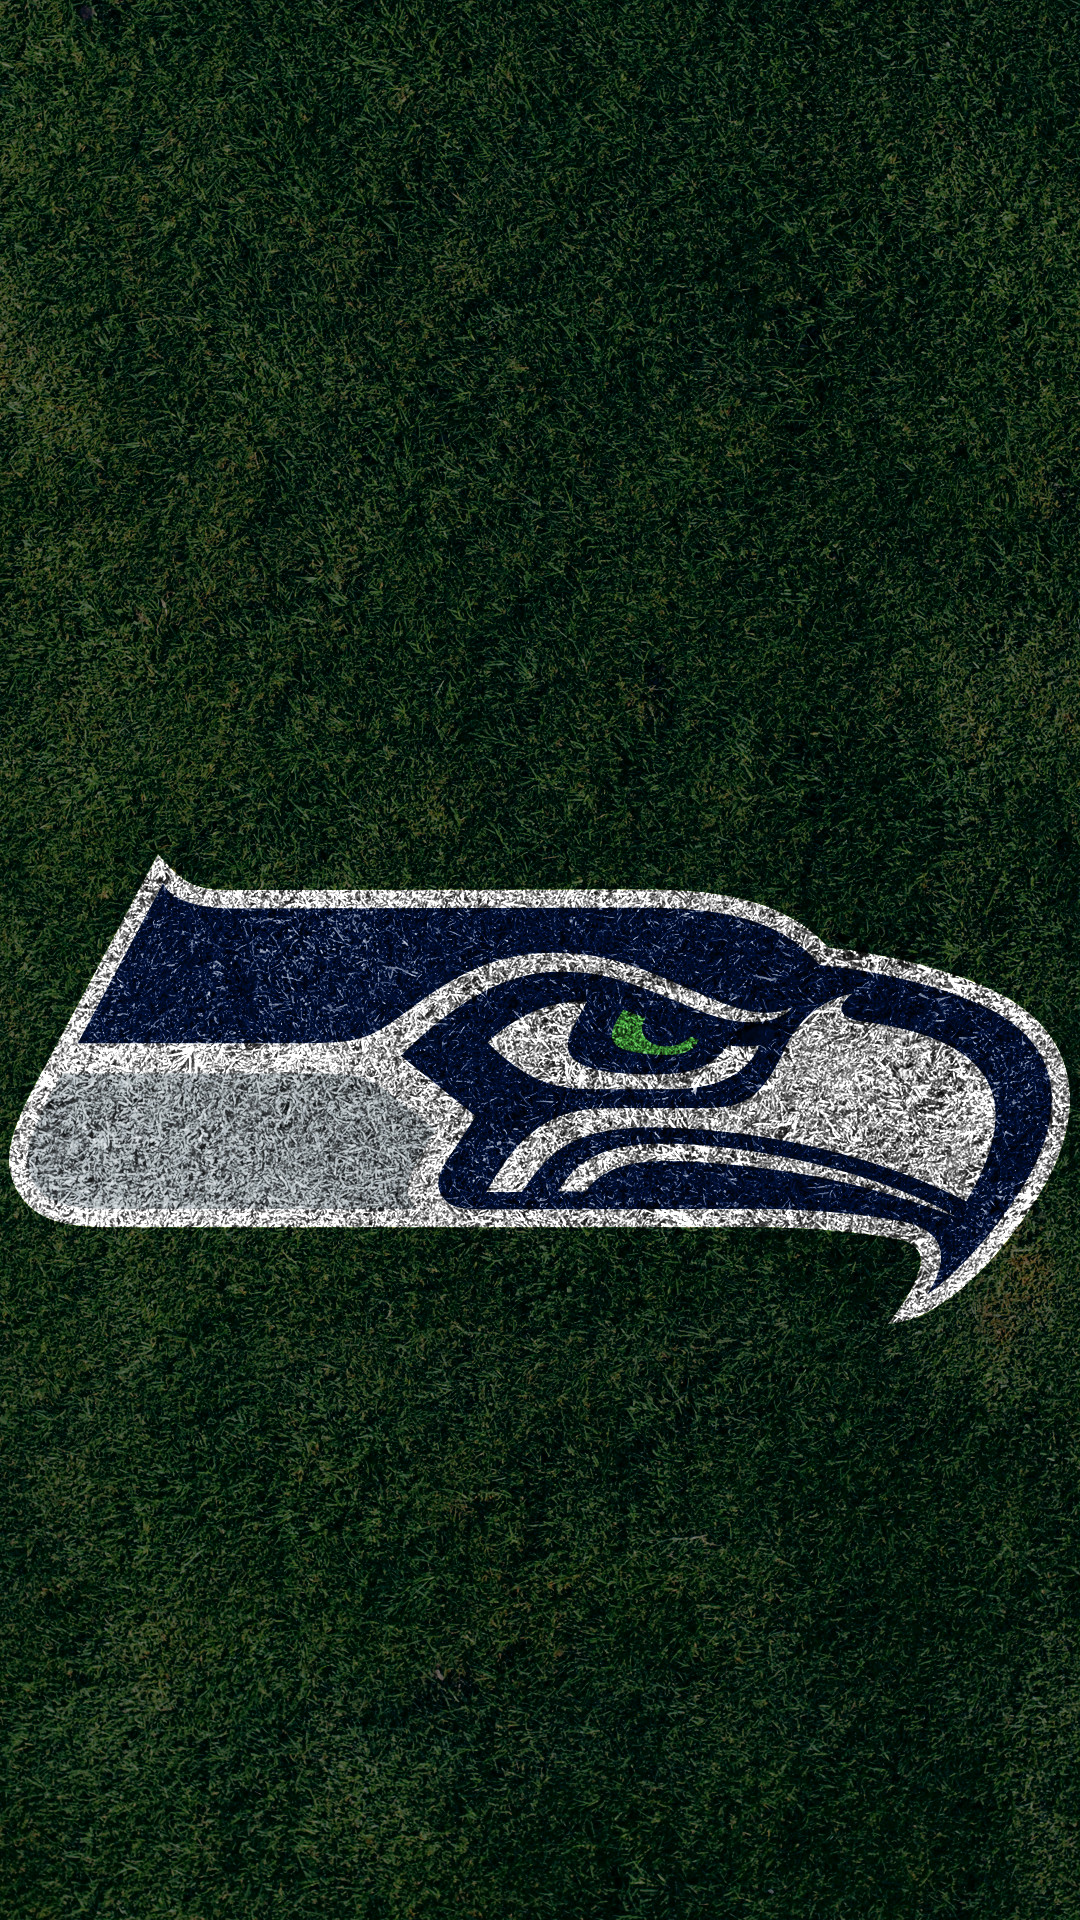 Seattle Seahawks Wallpaper Android Wallpaper For Mobile - Seattle Seahawks Flag - HD Wallpaper 